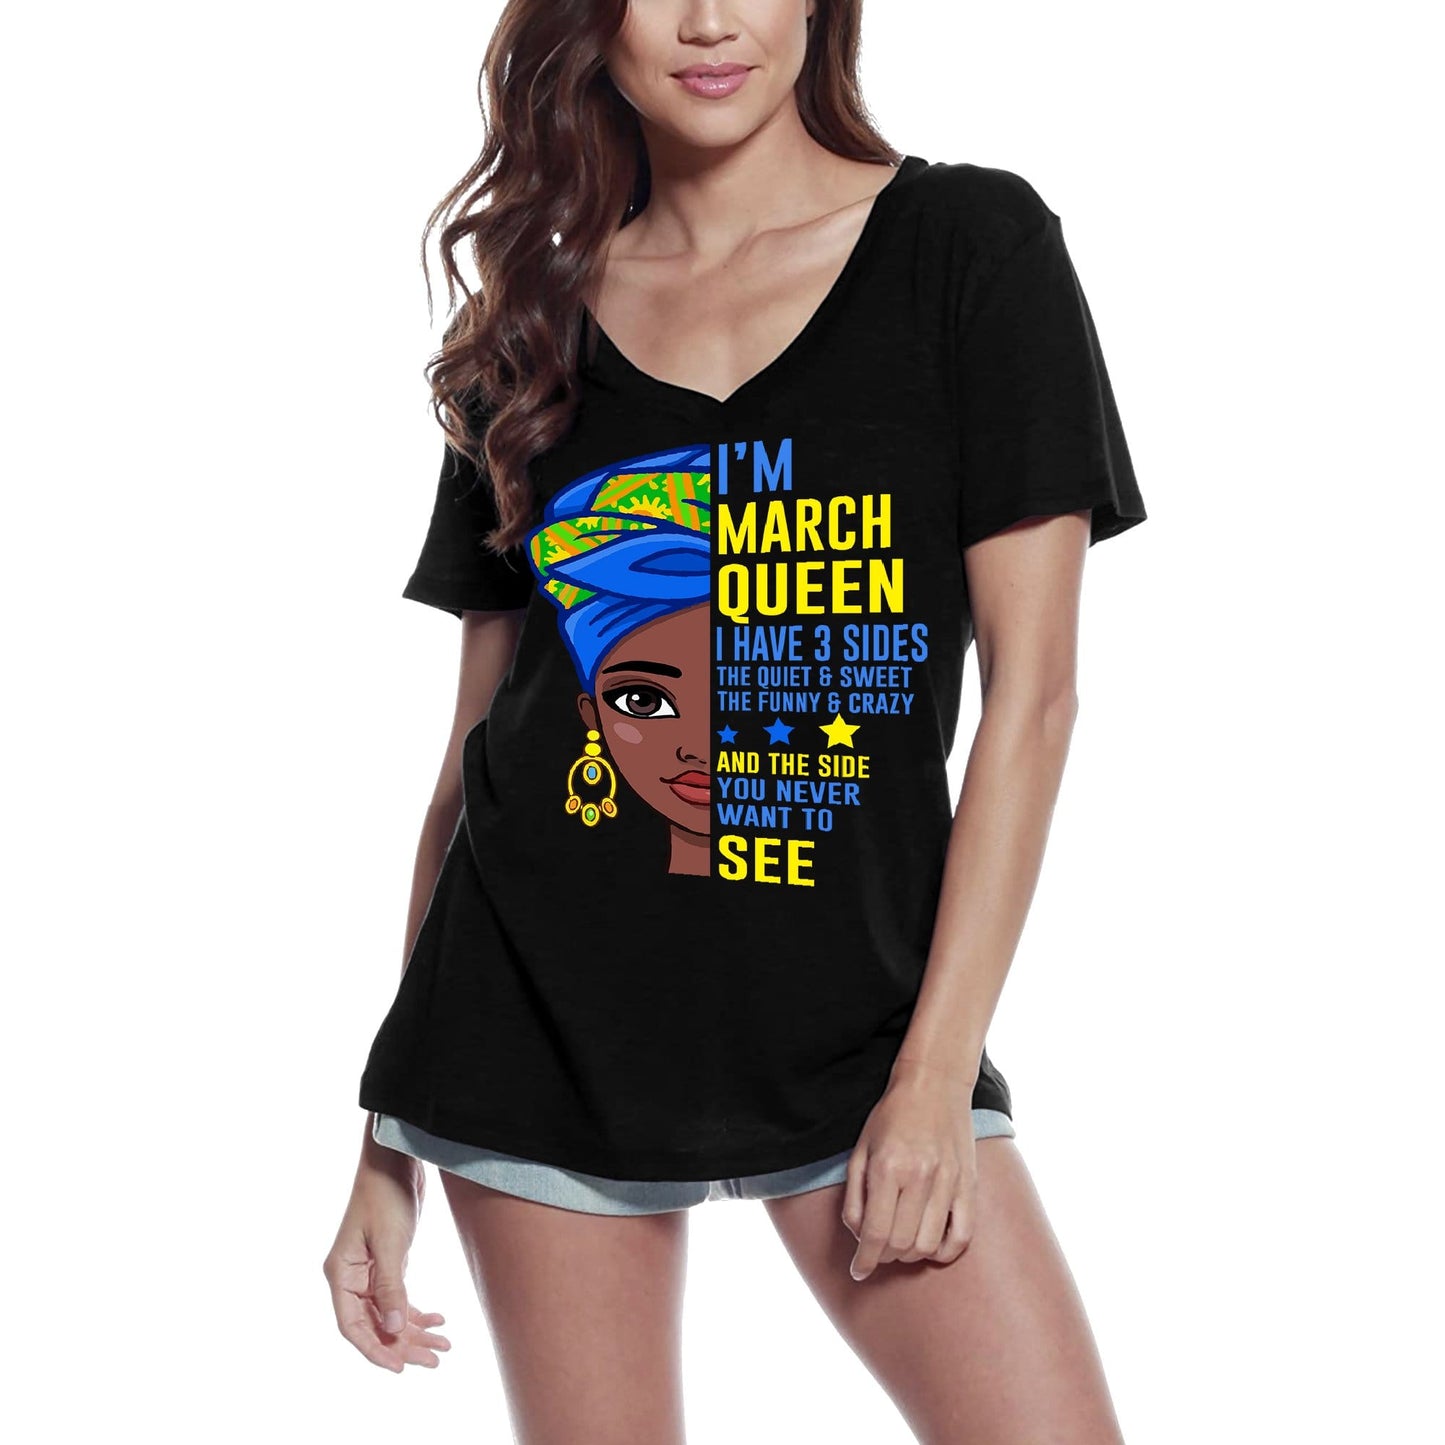 ULTRABASIC Women's Funny T-Shirt I'm March Queen - Birthday Shirt Gift for Ladies